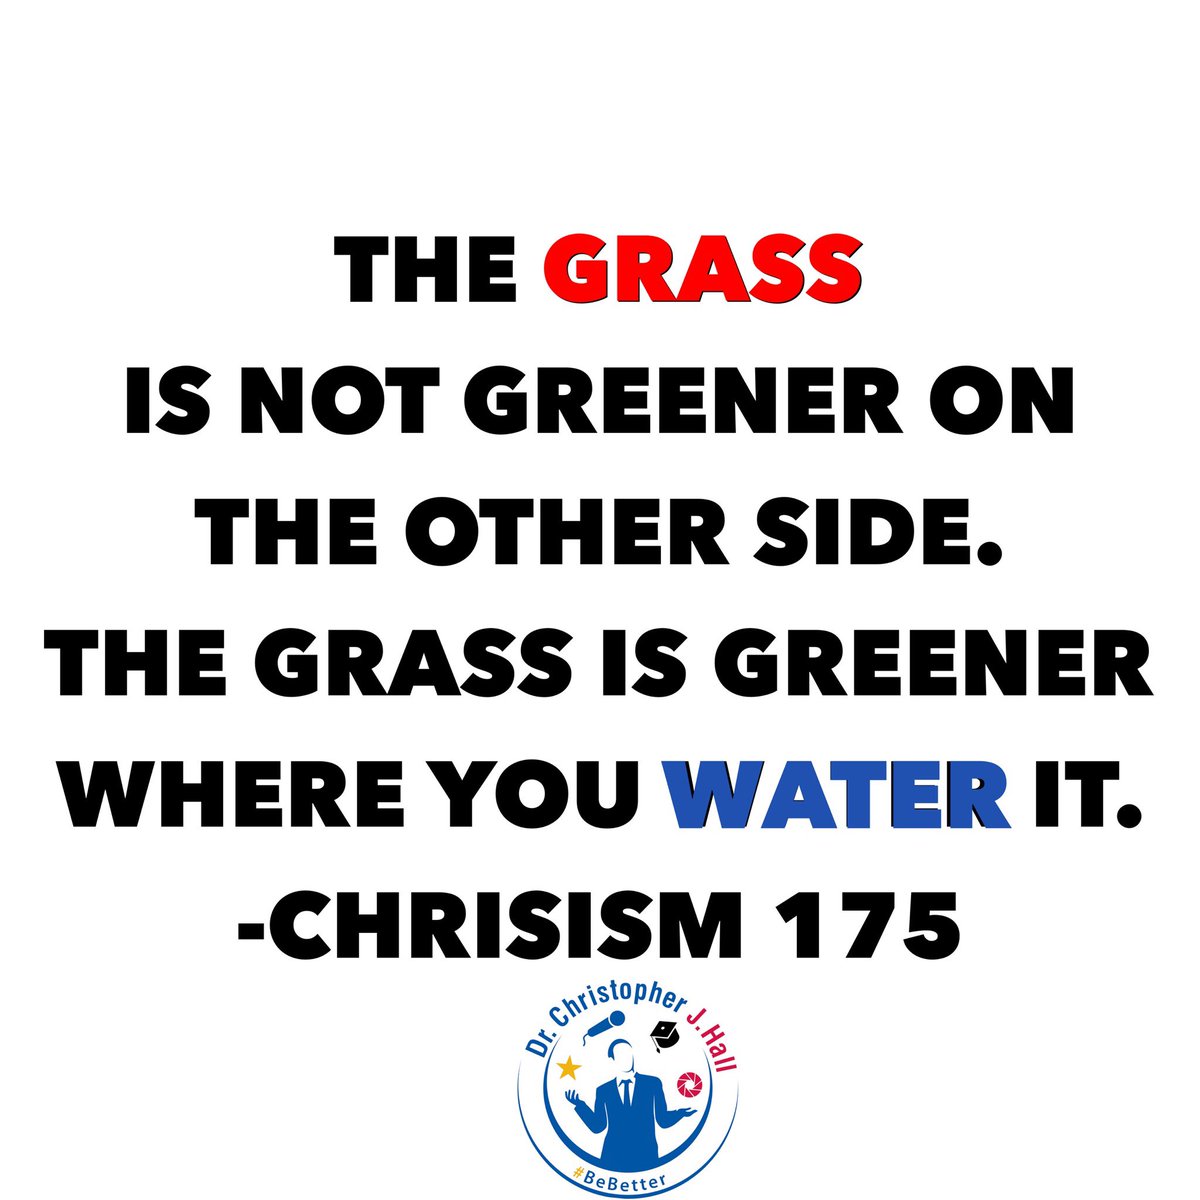 The grass is not greener on the other side. The grass is greener where you water it. Chrisism 175
.
#grass #greener #motivation #inspiration #Chrisism #Chrisisms #whereyouwaterit #lifelesson #qotd #mindset #noexcuses #encouragement #stayfocused #BeBetter